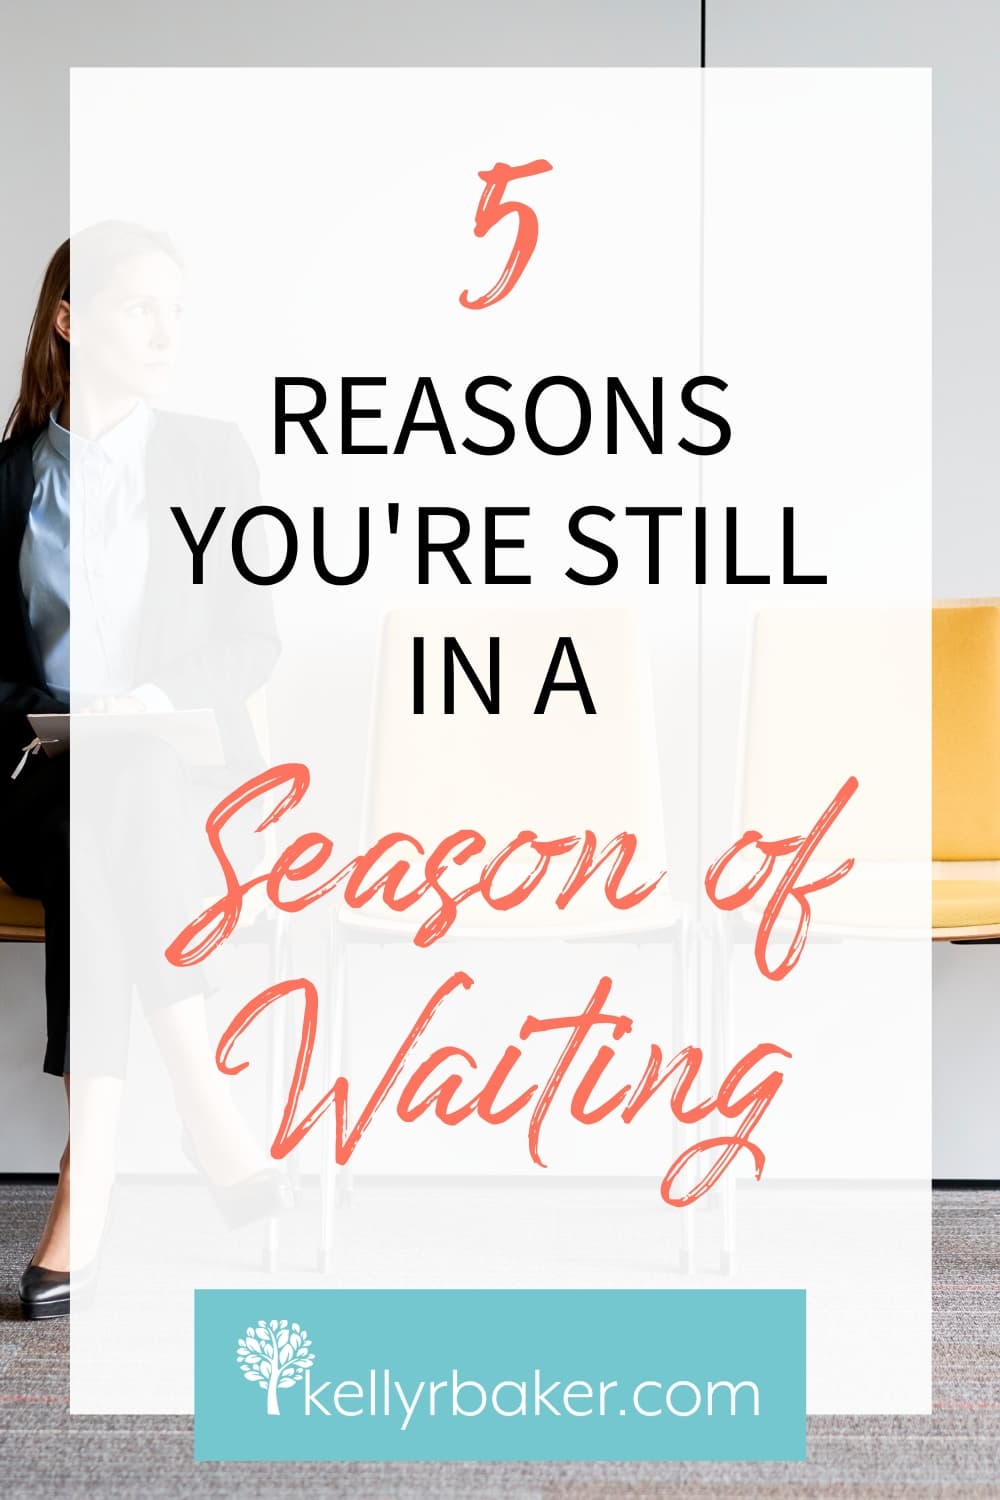 5 Reasons You’re Still in a Season of Waiting